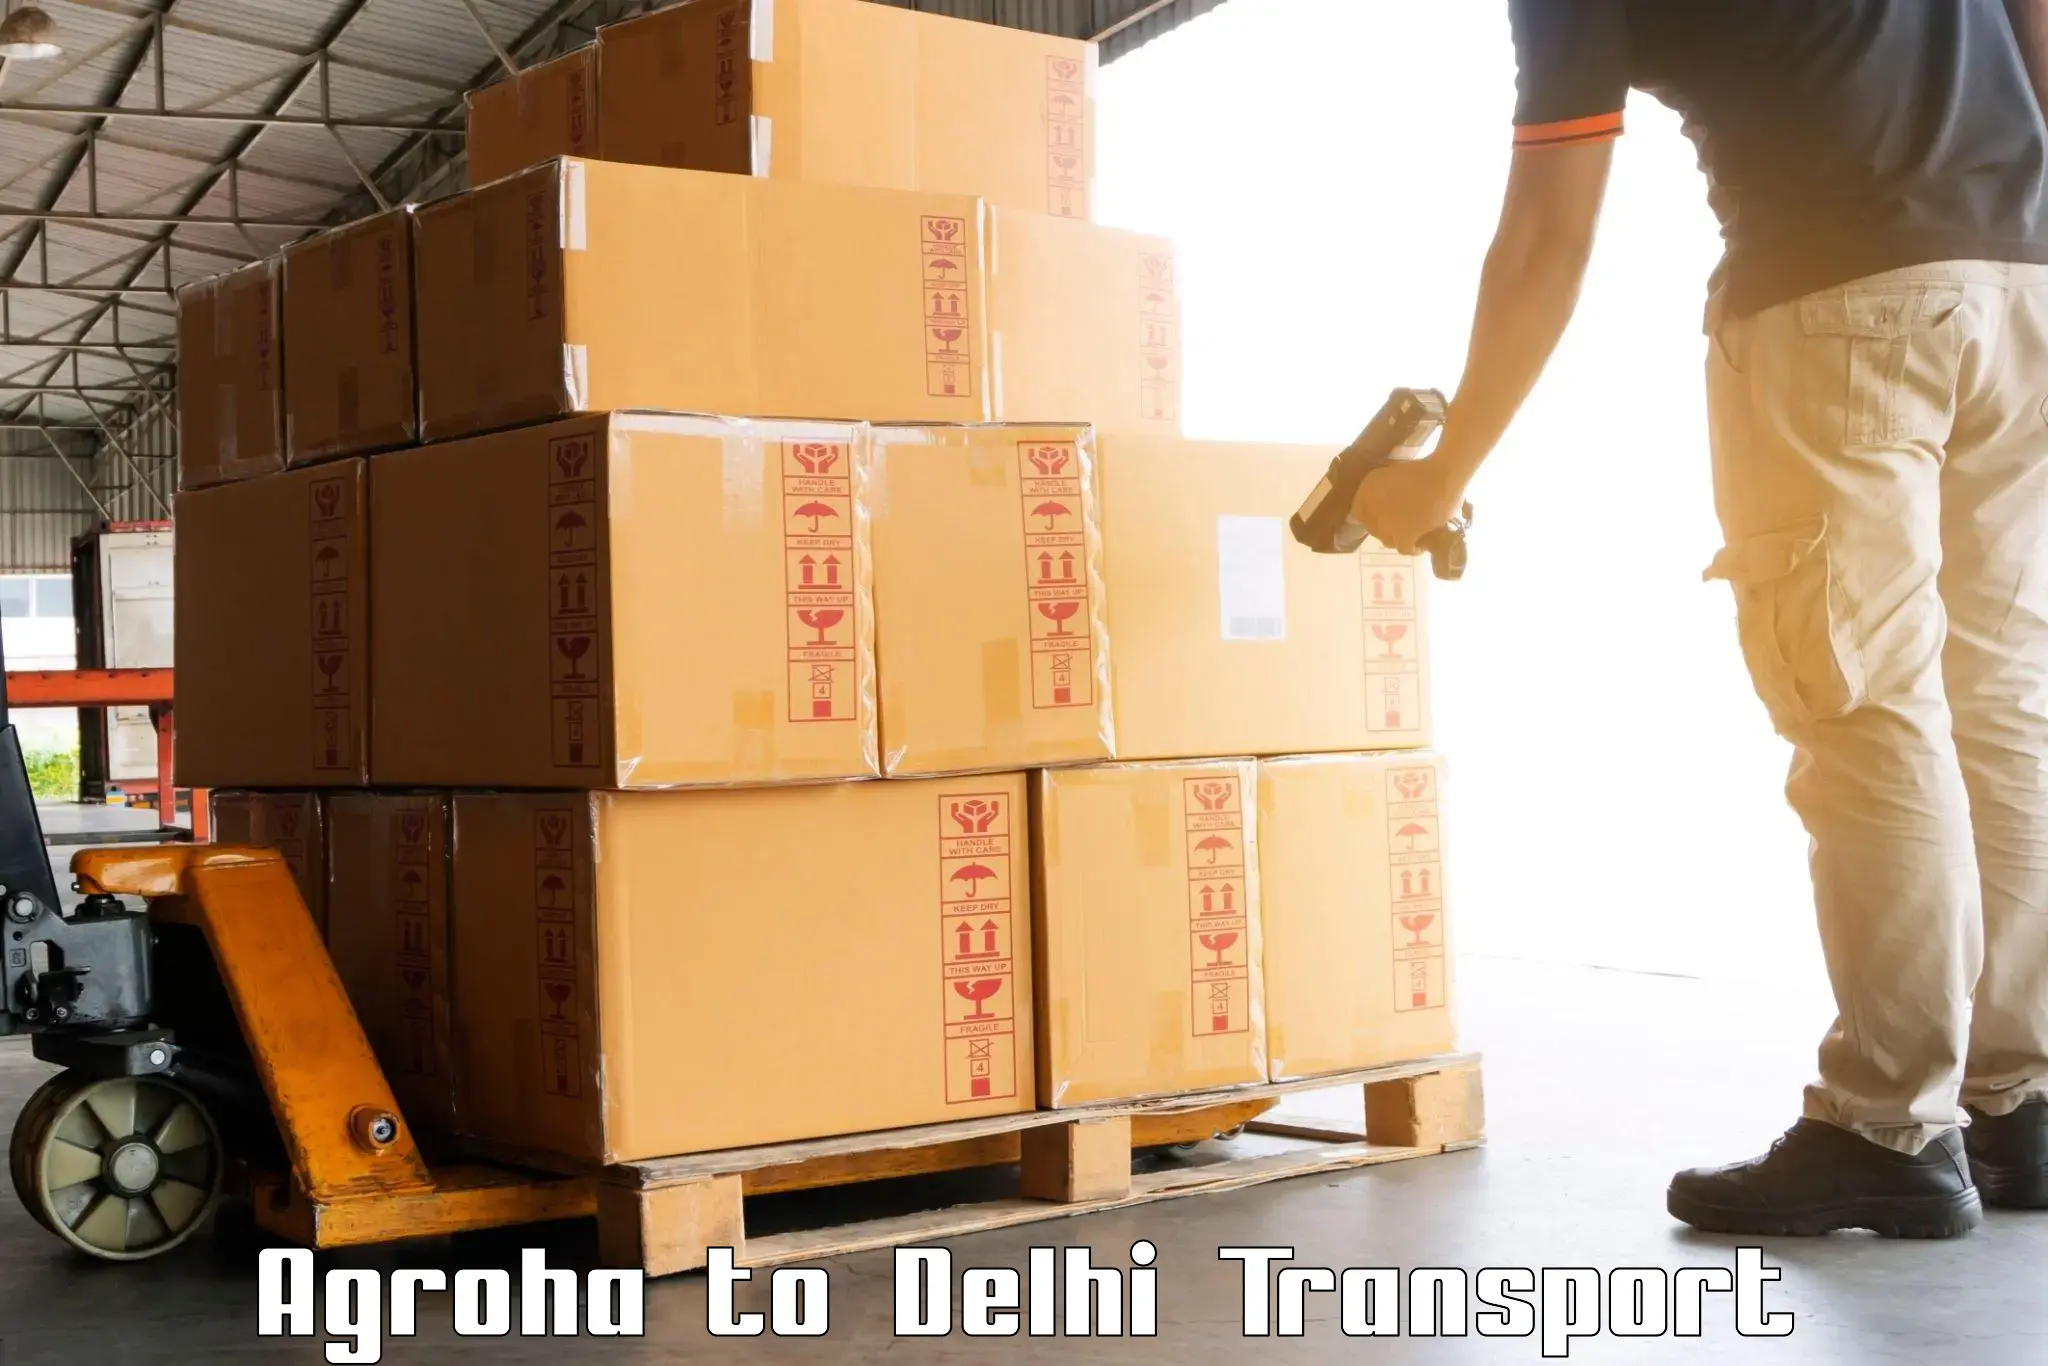 Transport in sharing Agroha to Jhilmil